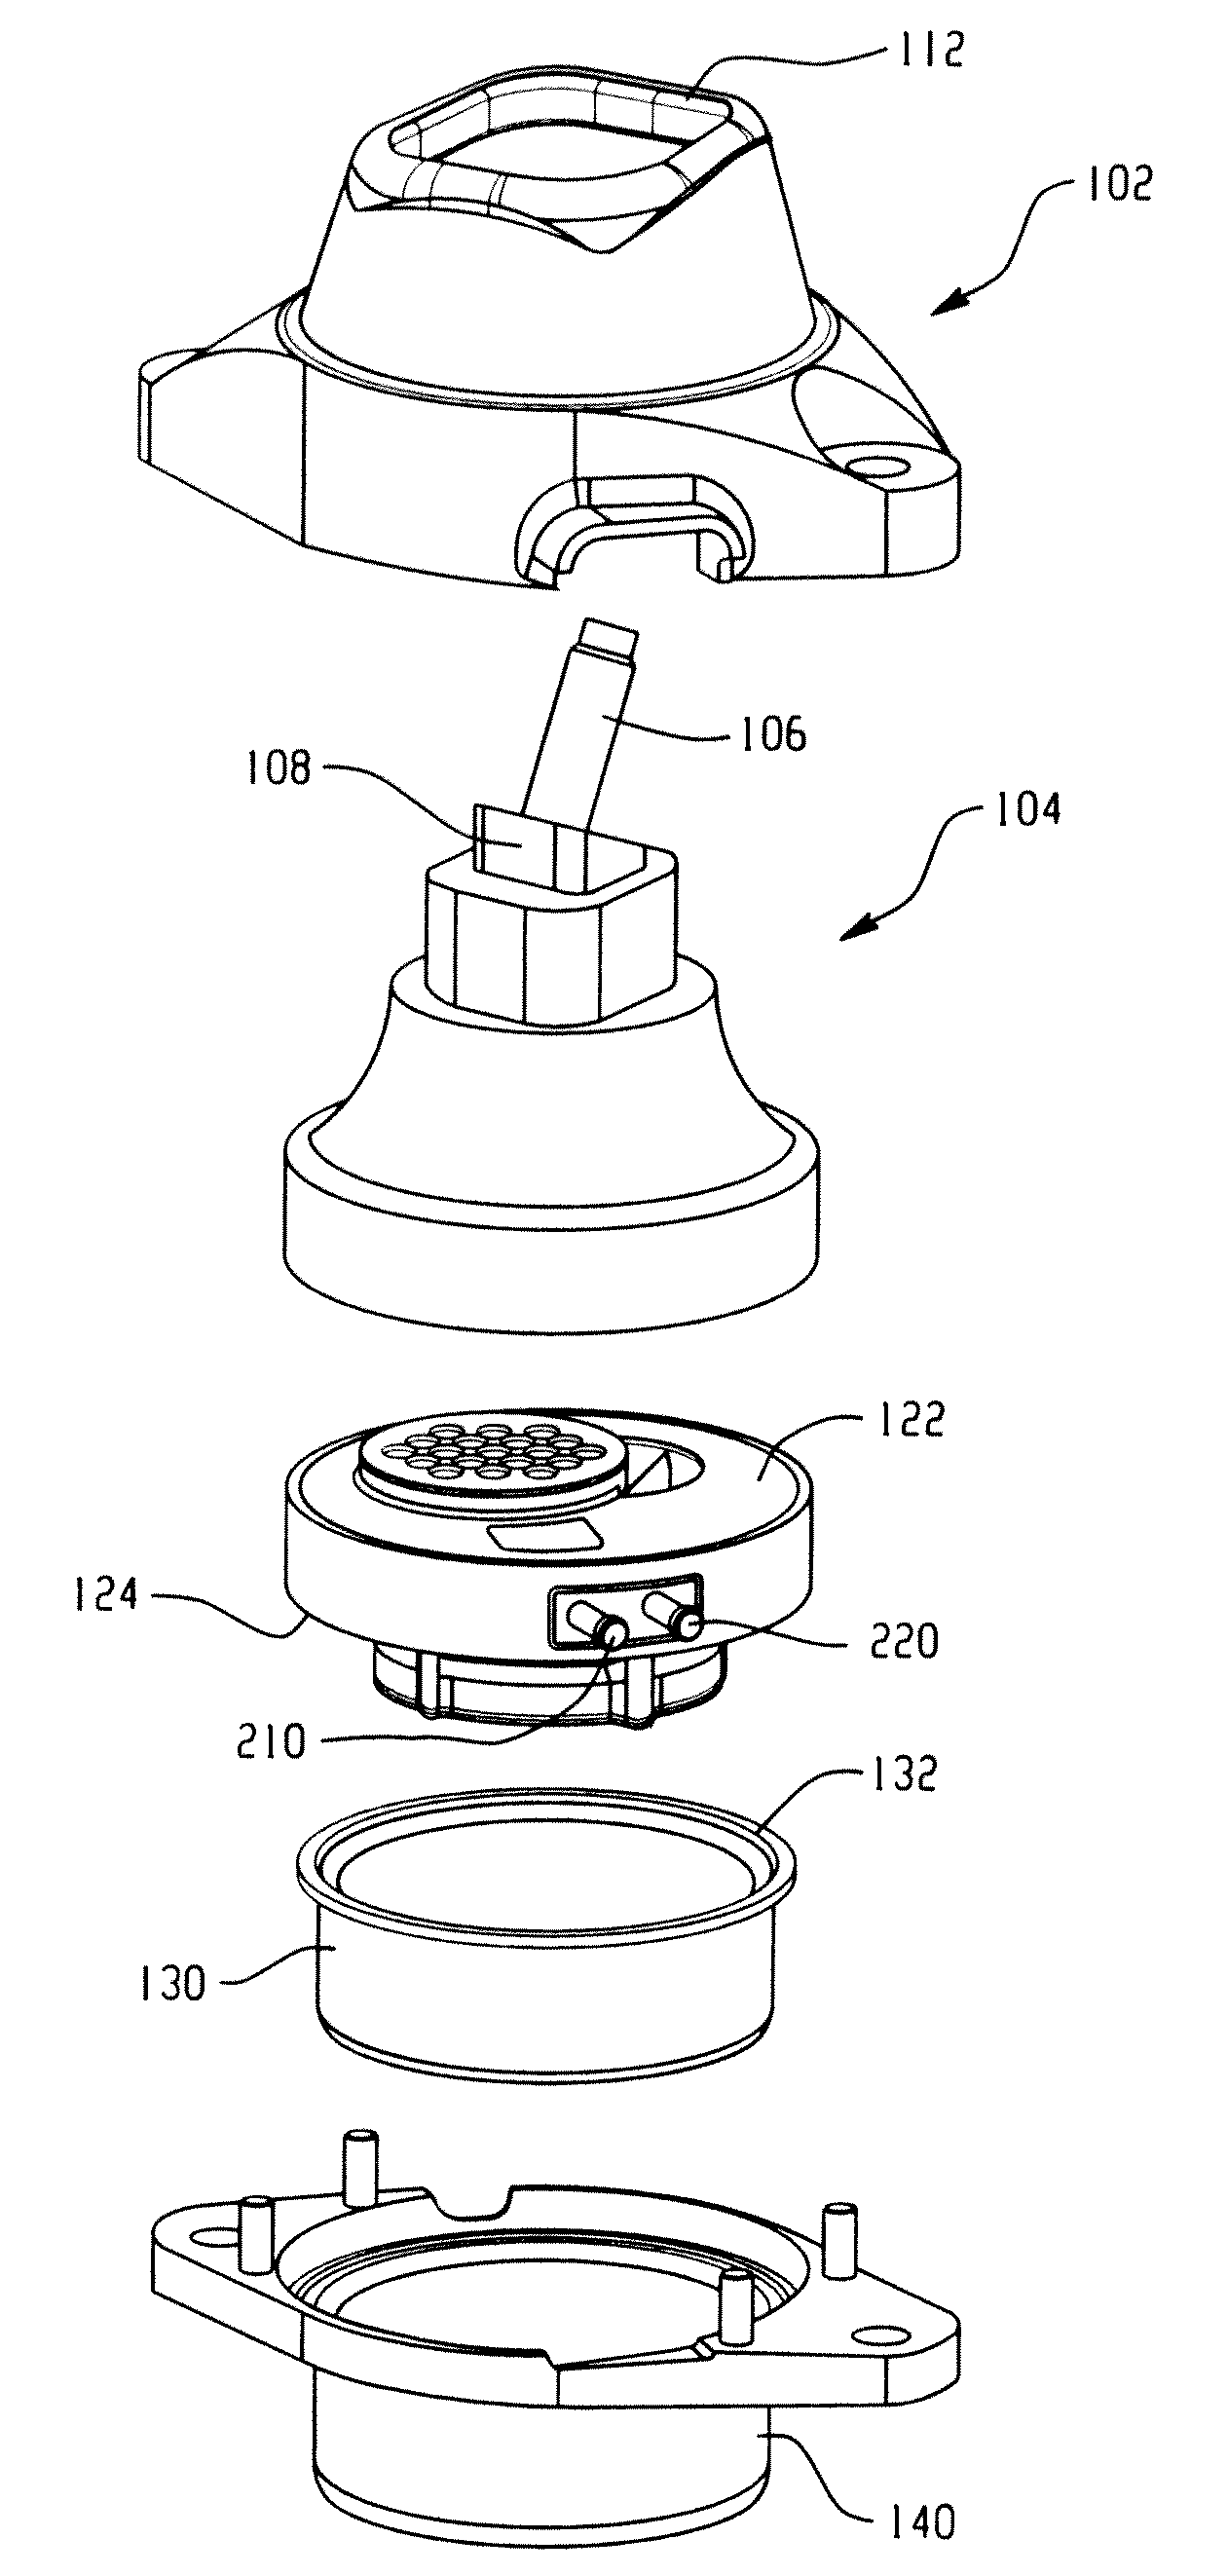 Multi-stage switchable inertia track assembly